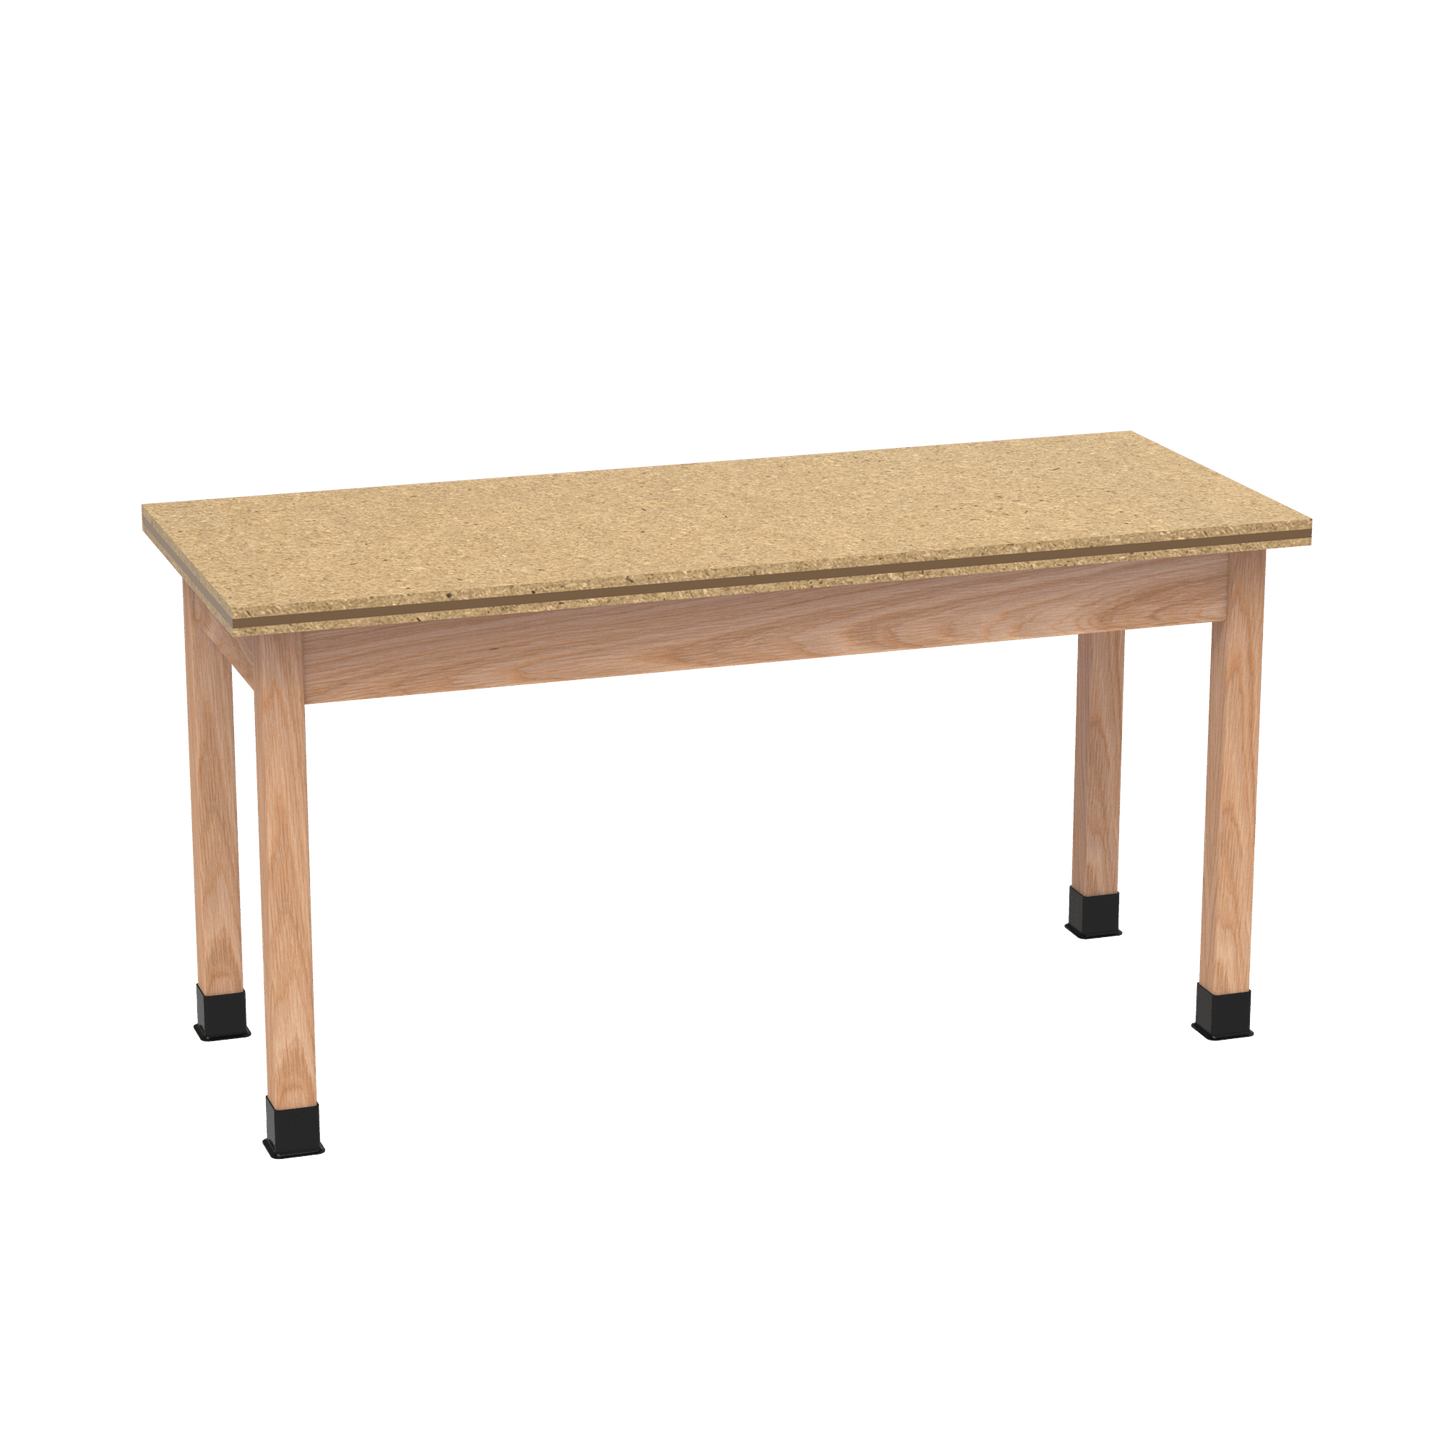 Diversified Woodcrafts Science Table - Plain Apron - 48" W x 24" D - Solid Wood Frame and Adjustable Glides - SchoolOutlet